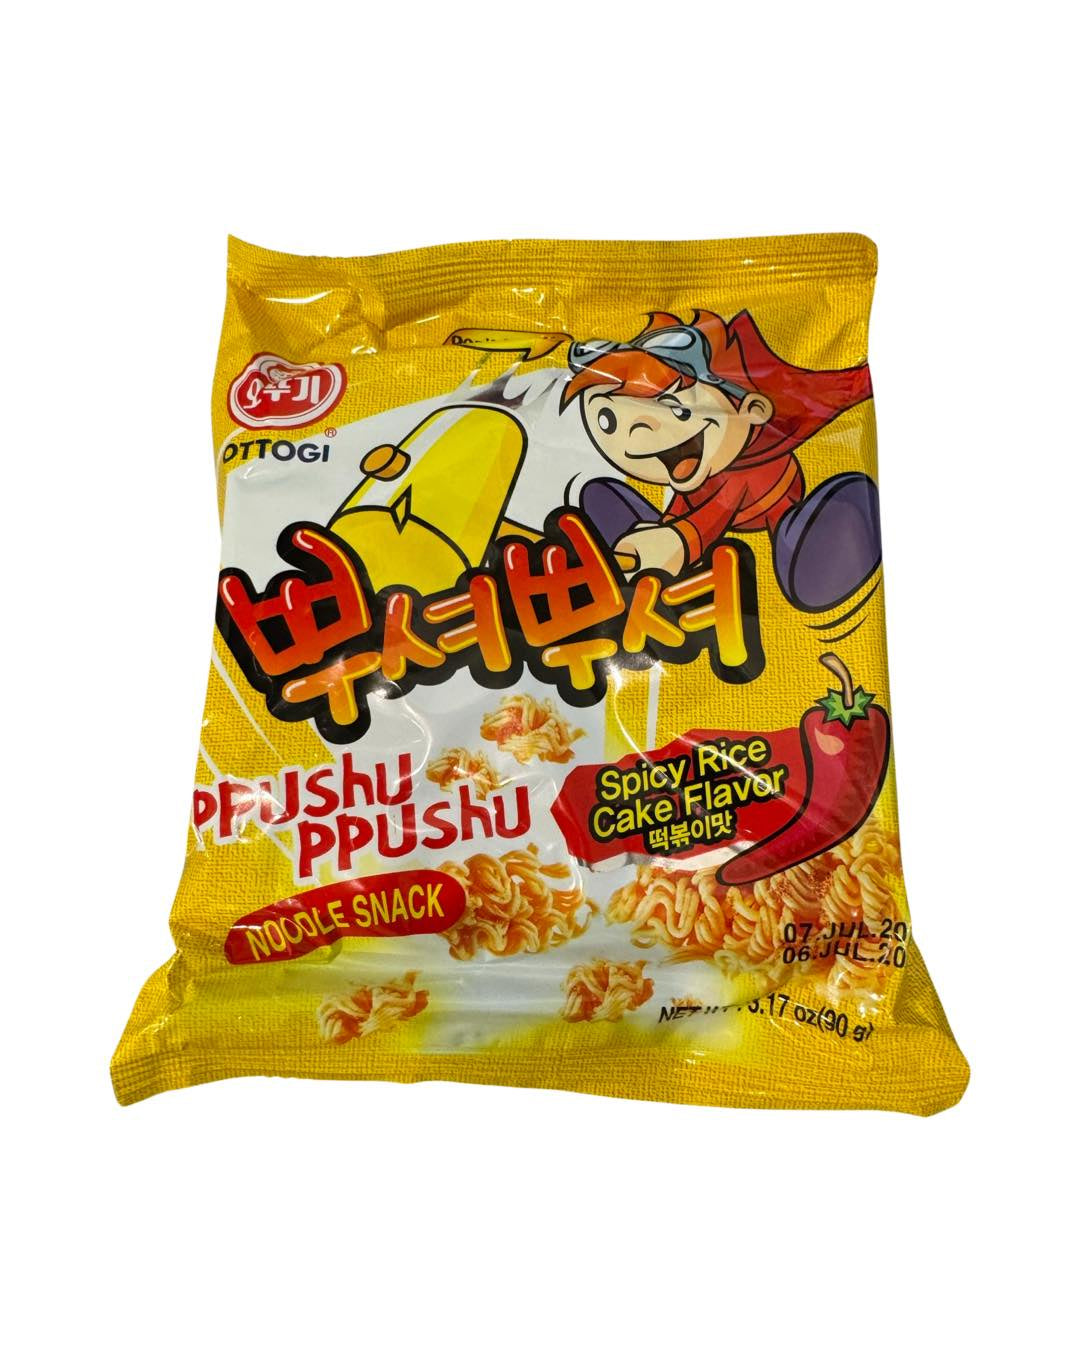 NOODLE SNACK SPICY RICE CAKE FLAVOUR